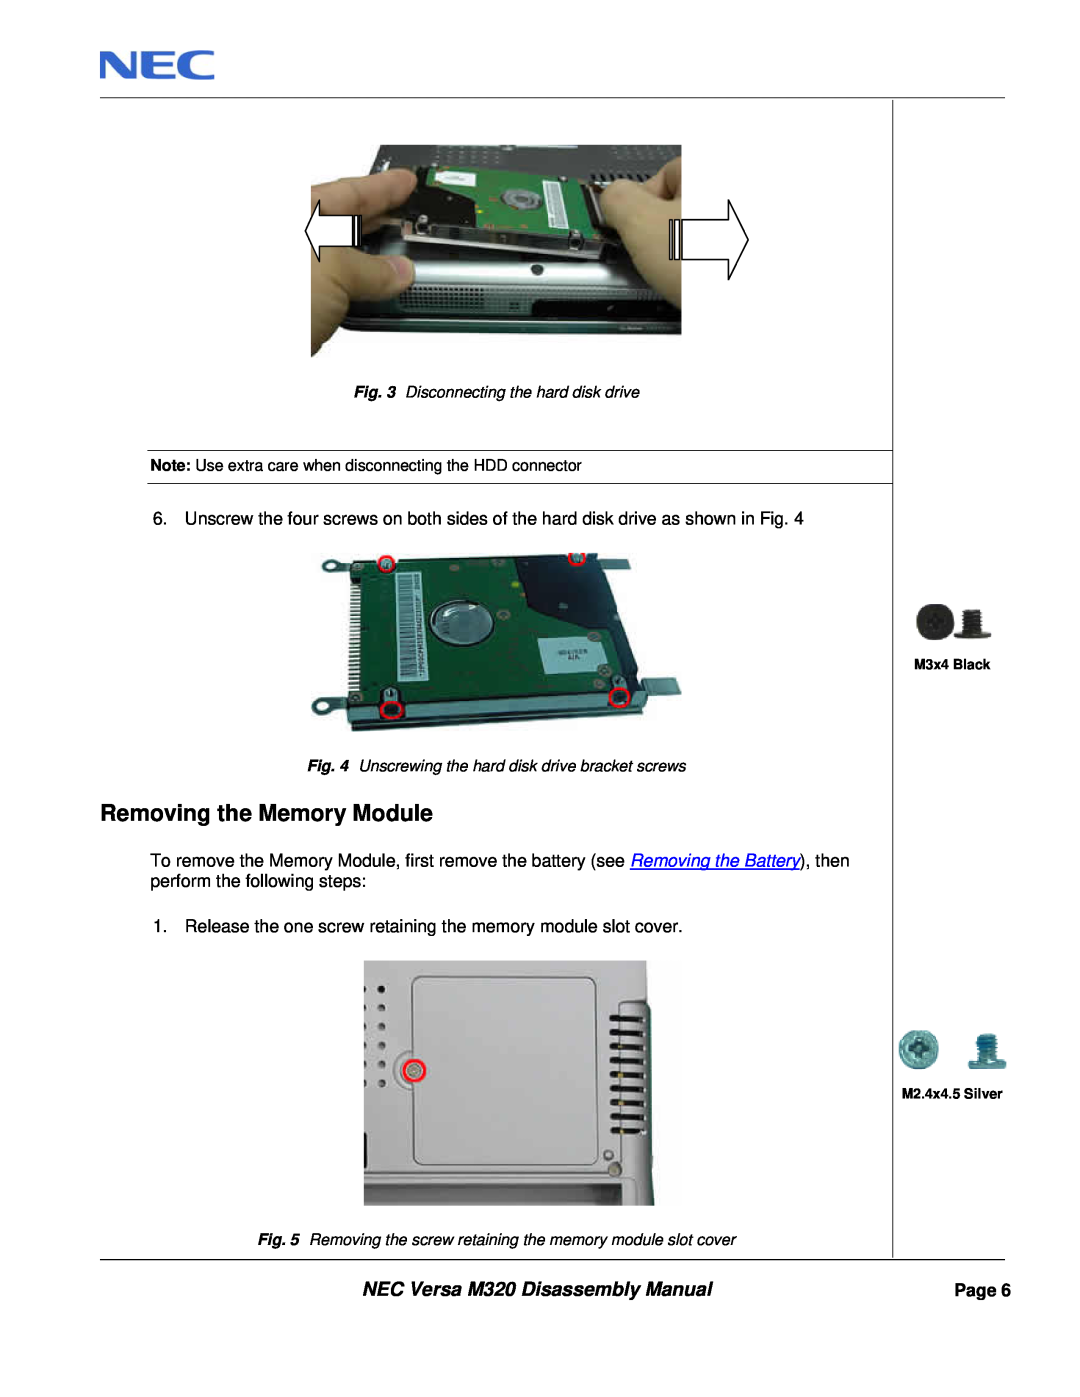 NEC manual Removing the Memory Module, NEC Versa M320 Disassembly Manual 